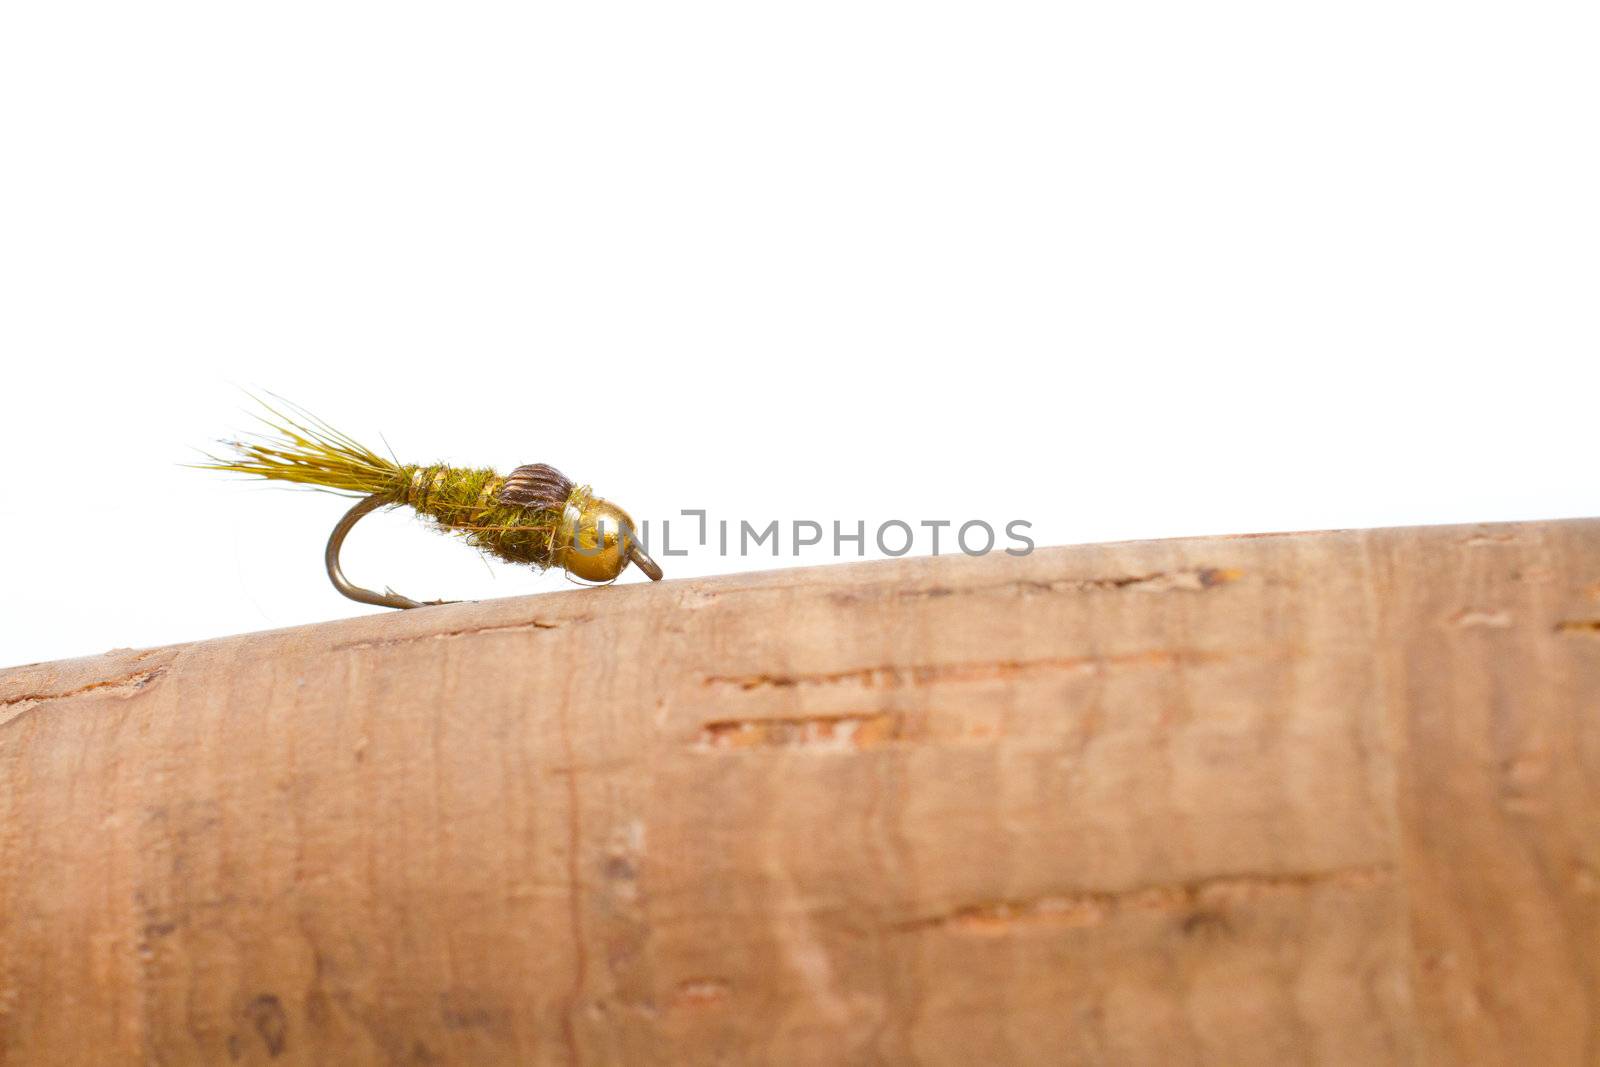 Isolated in a studio with a white background a hares ear nymph in natural colors is photographed closeup against the cork handle of a fly fishing rod.